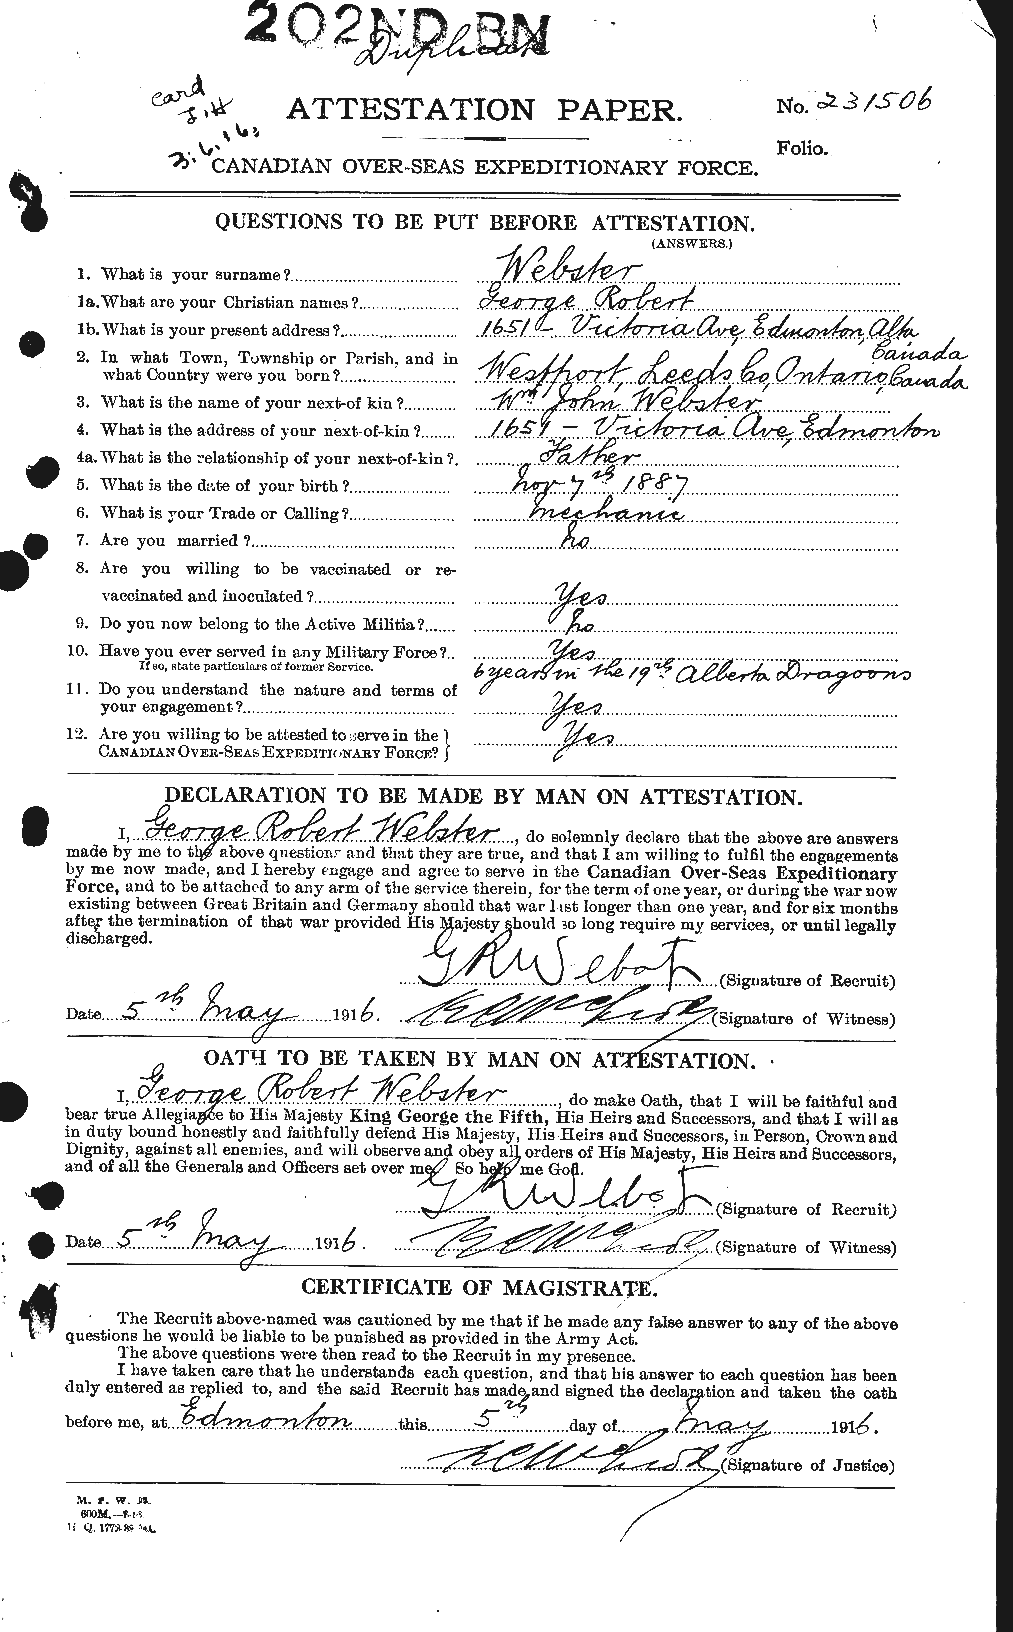 Personnel Records of the First World War - CEF 670393a